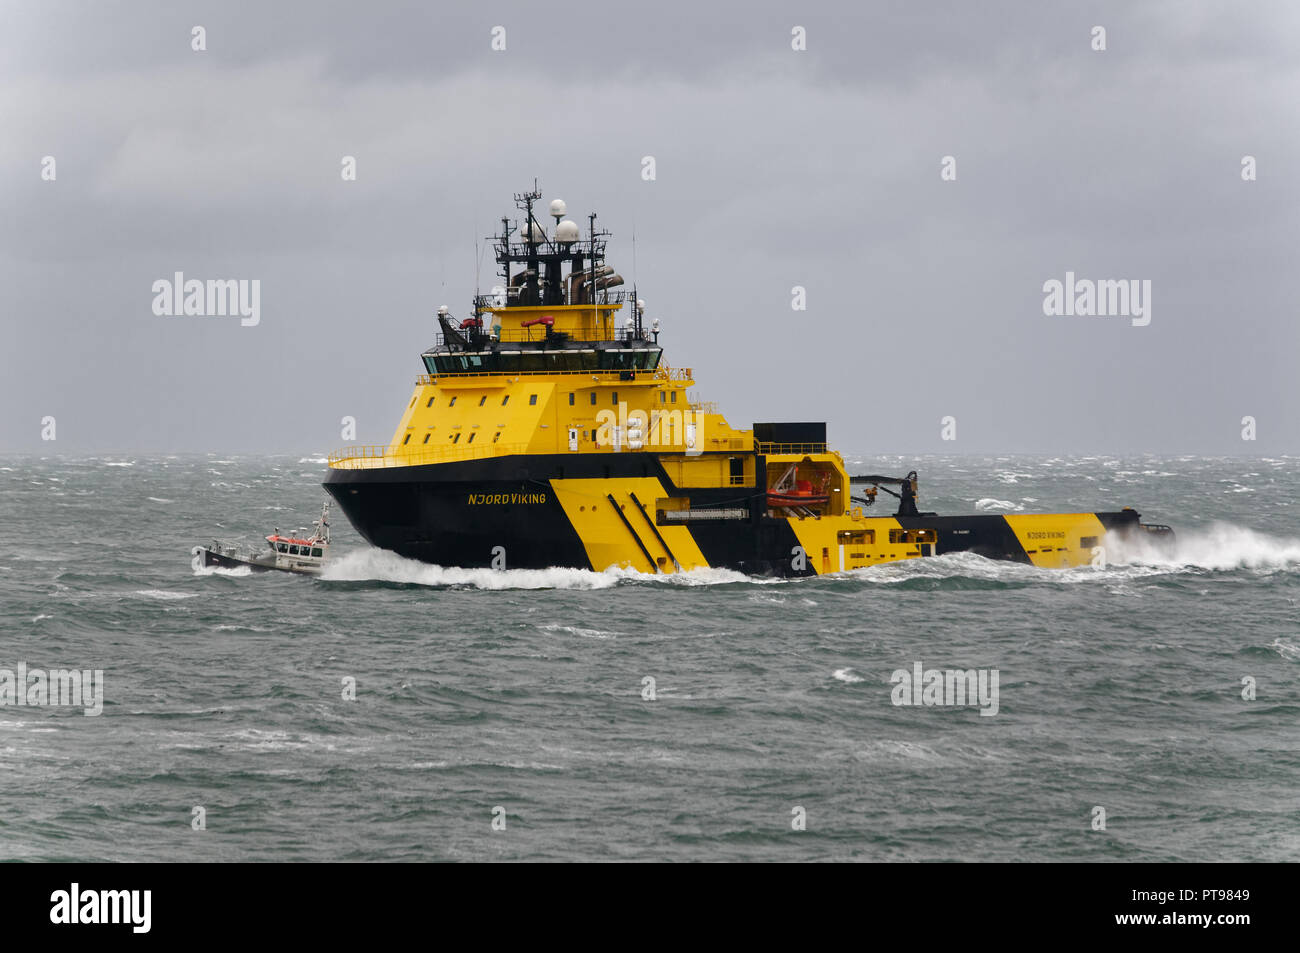 The Njord Viking High Ice-classed AHTS vessel capable of operations in harsh environment offshore seen taking approaching Aberdeen Harbour, Scotland Stock Photo